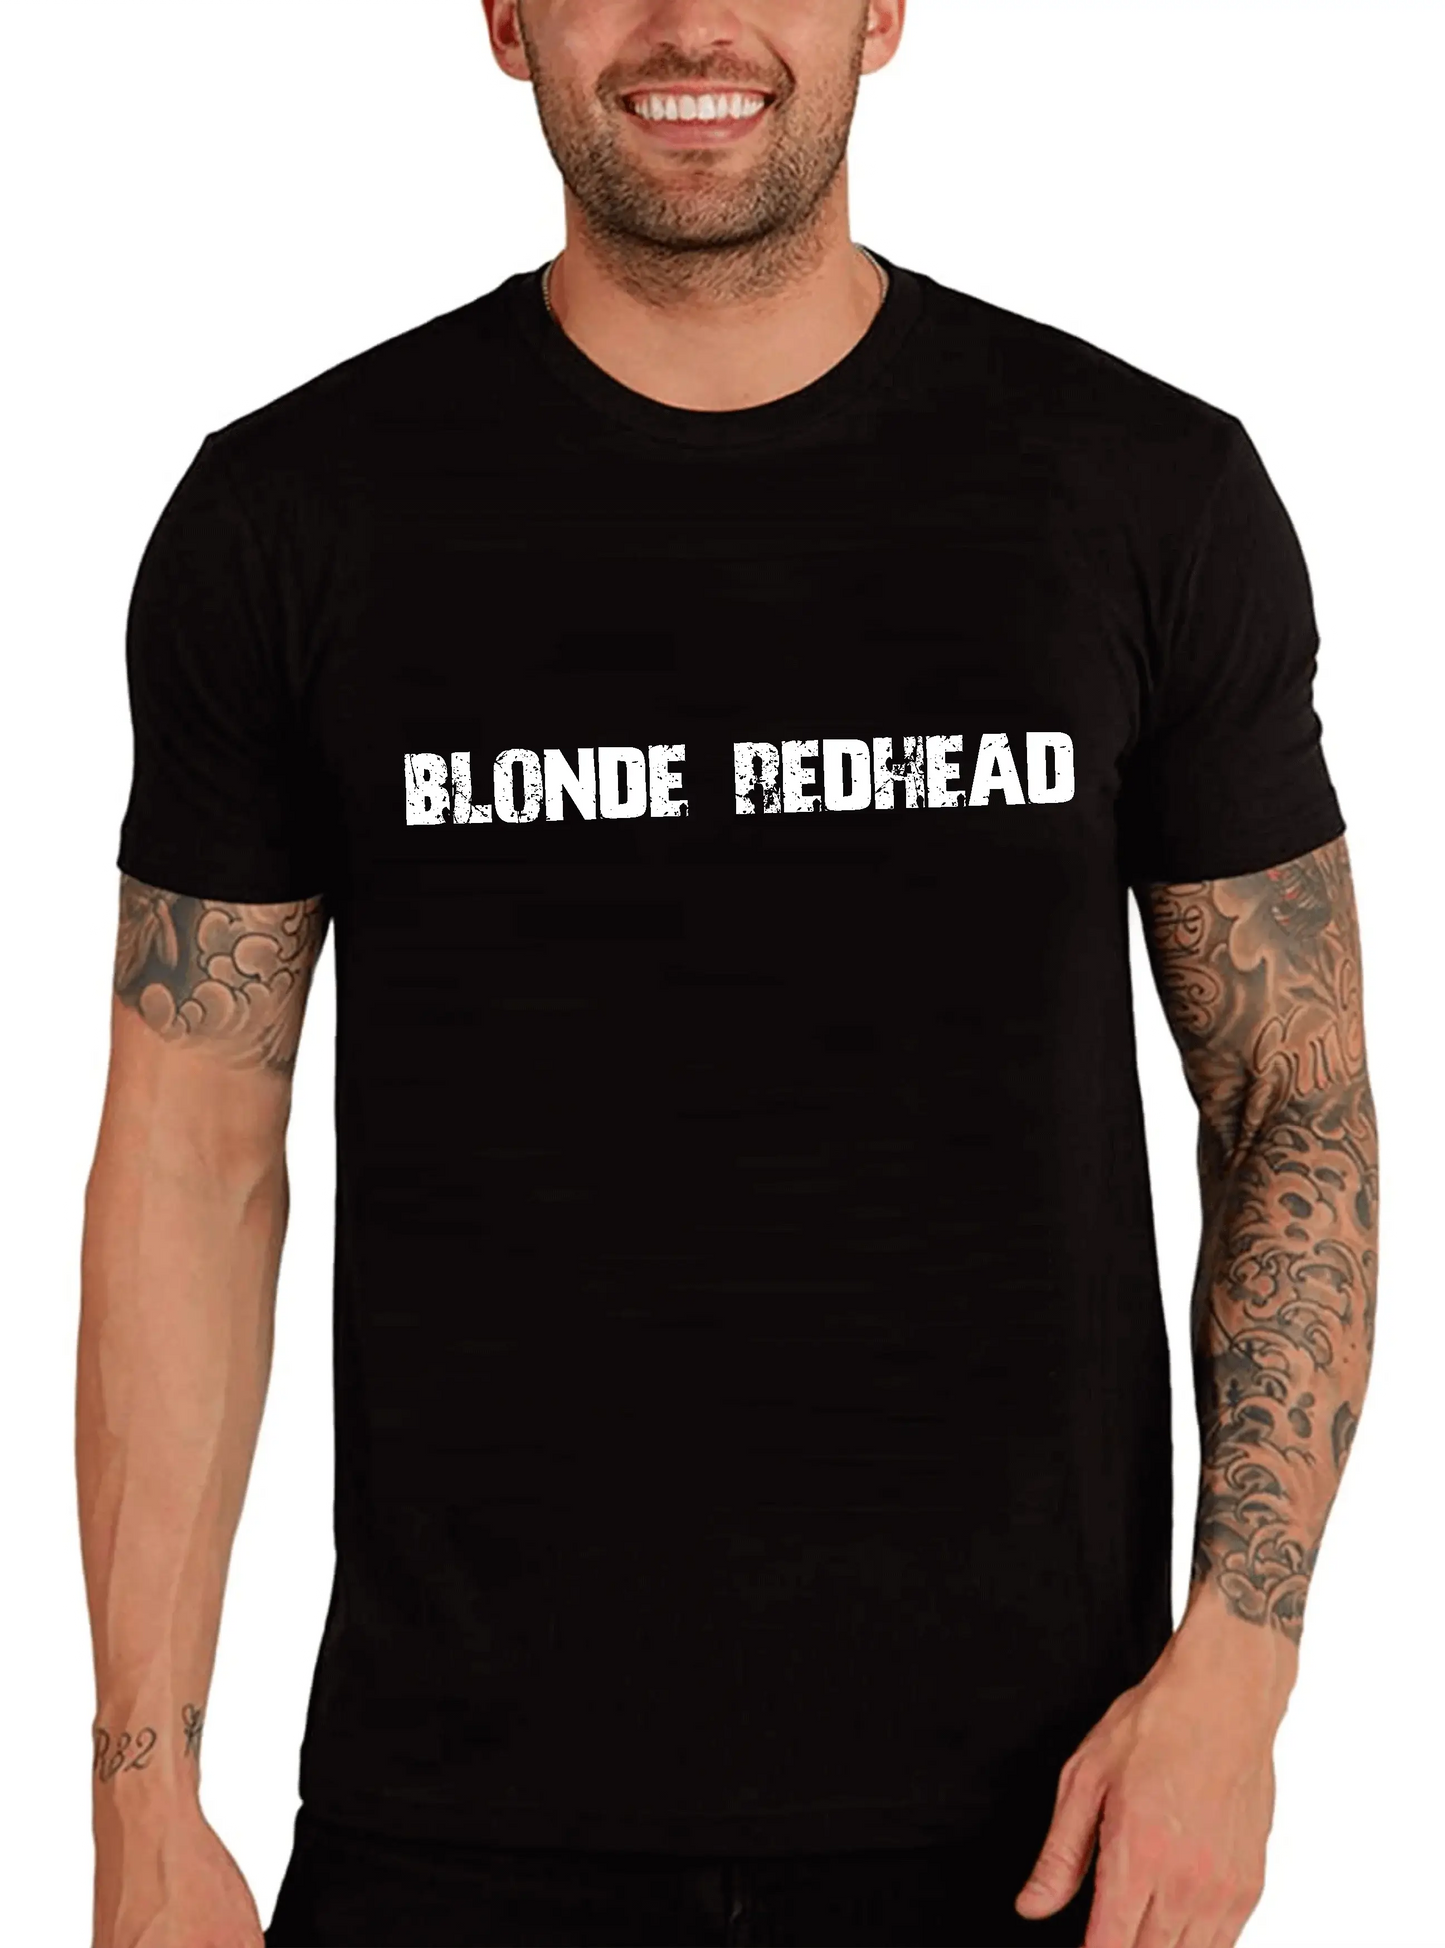 Men's Graphic T-Shirt Blonde Redhead Eco-Friendly Limited Edition Short Sleeve Tee-Shirt Vintage Birthday Gift Novelty